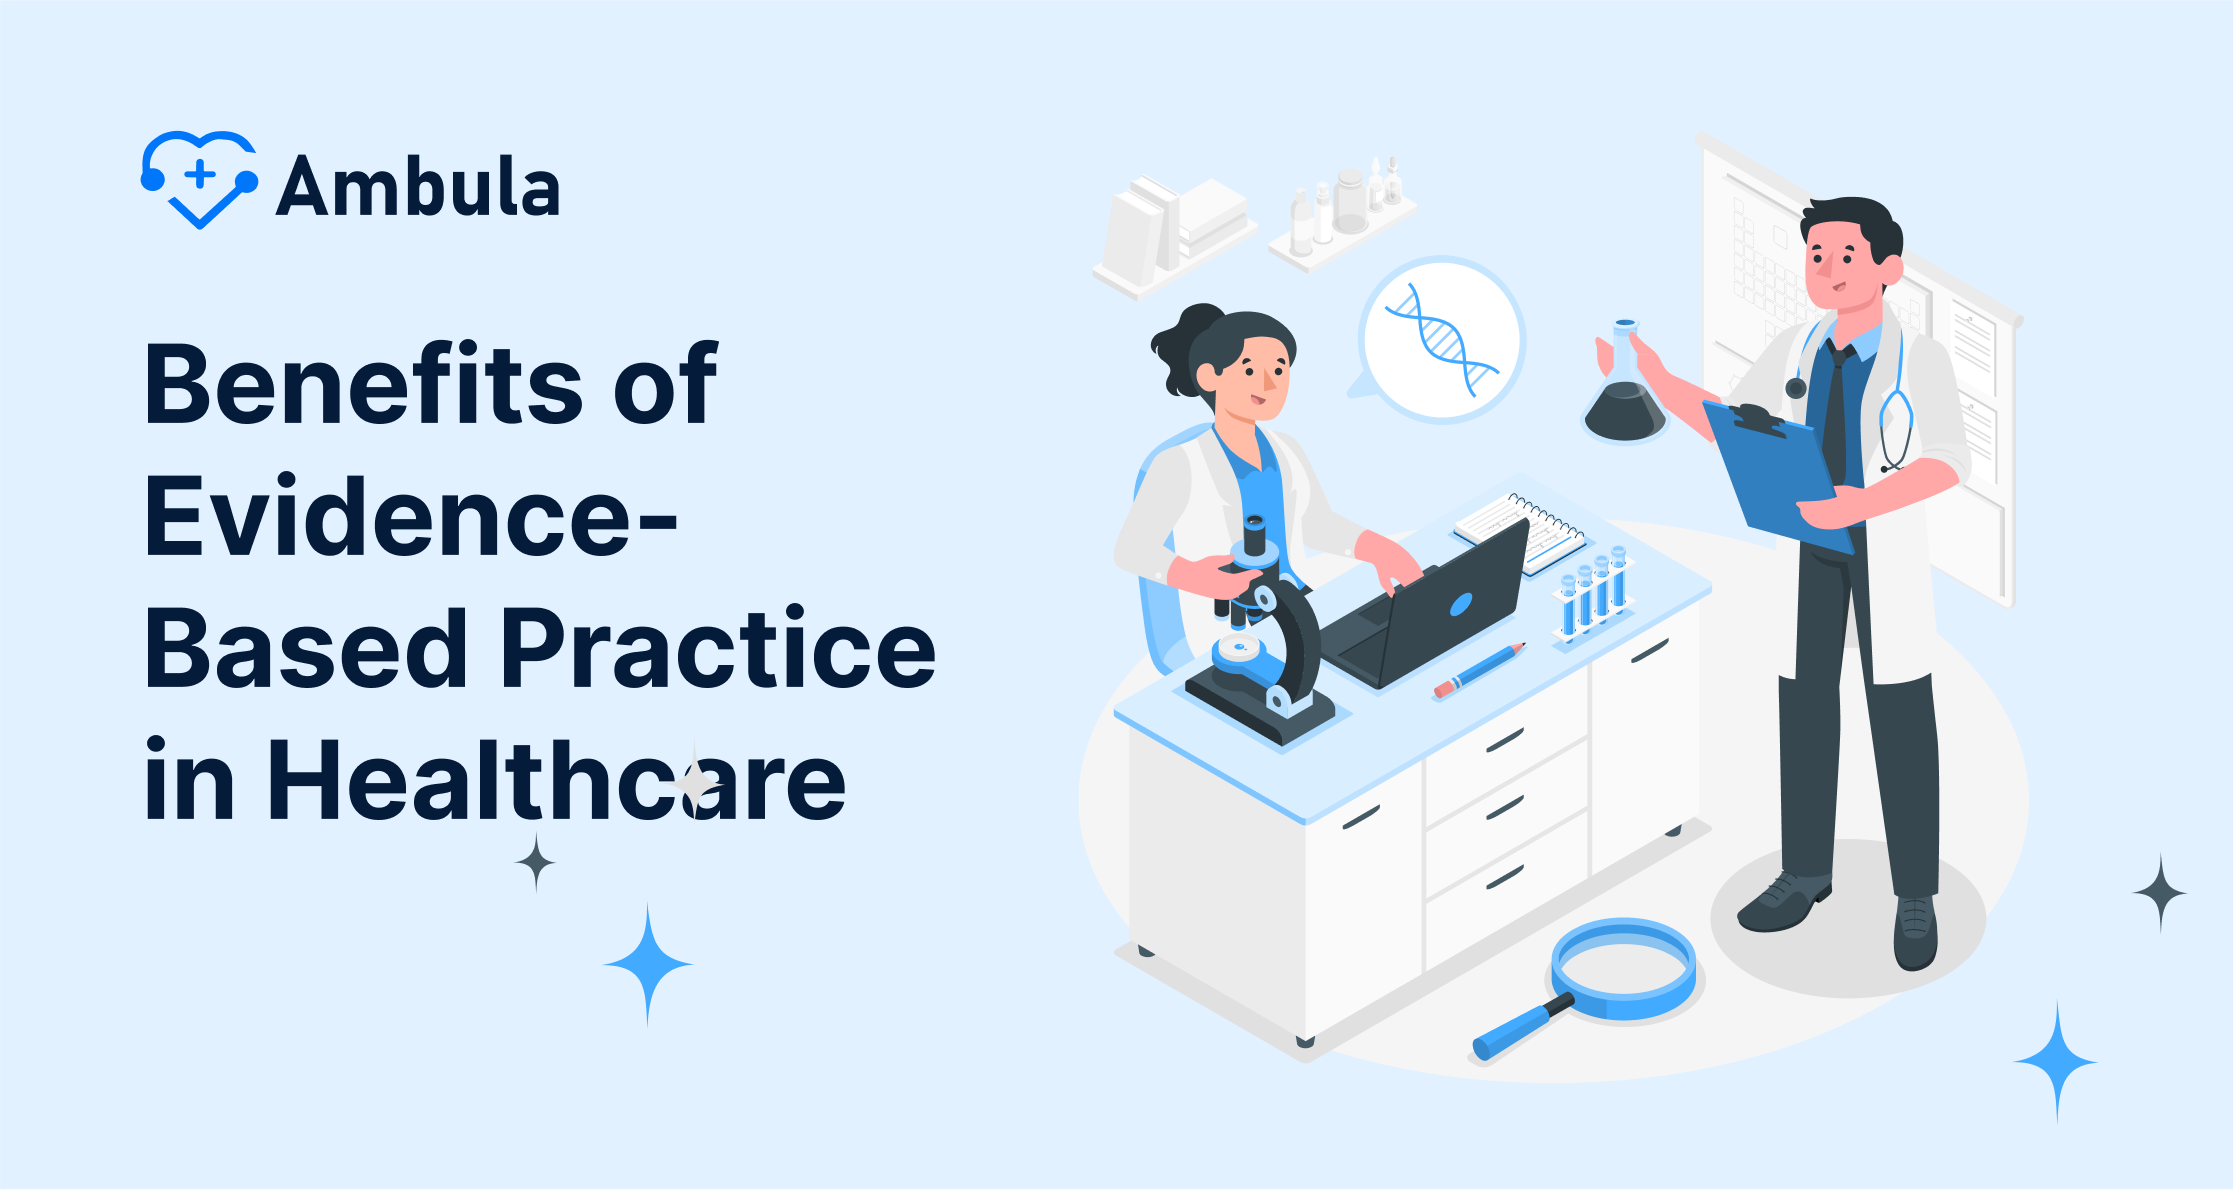 Benefits of Evidence-Based Practice in Healthcare